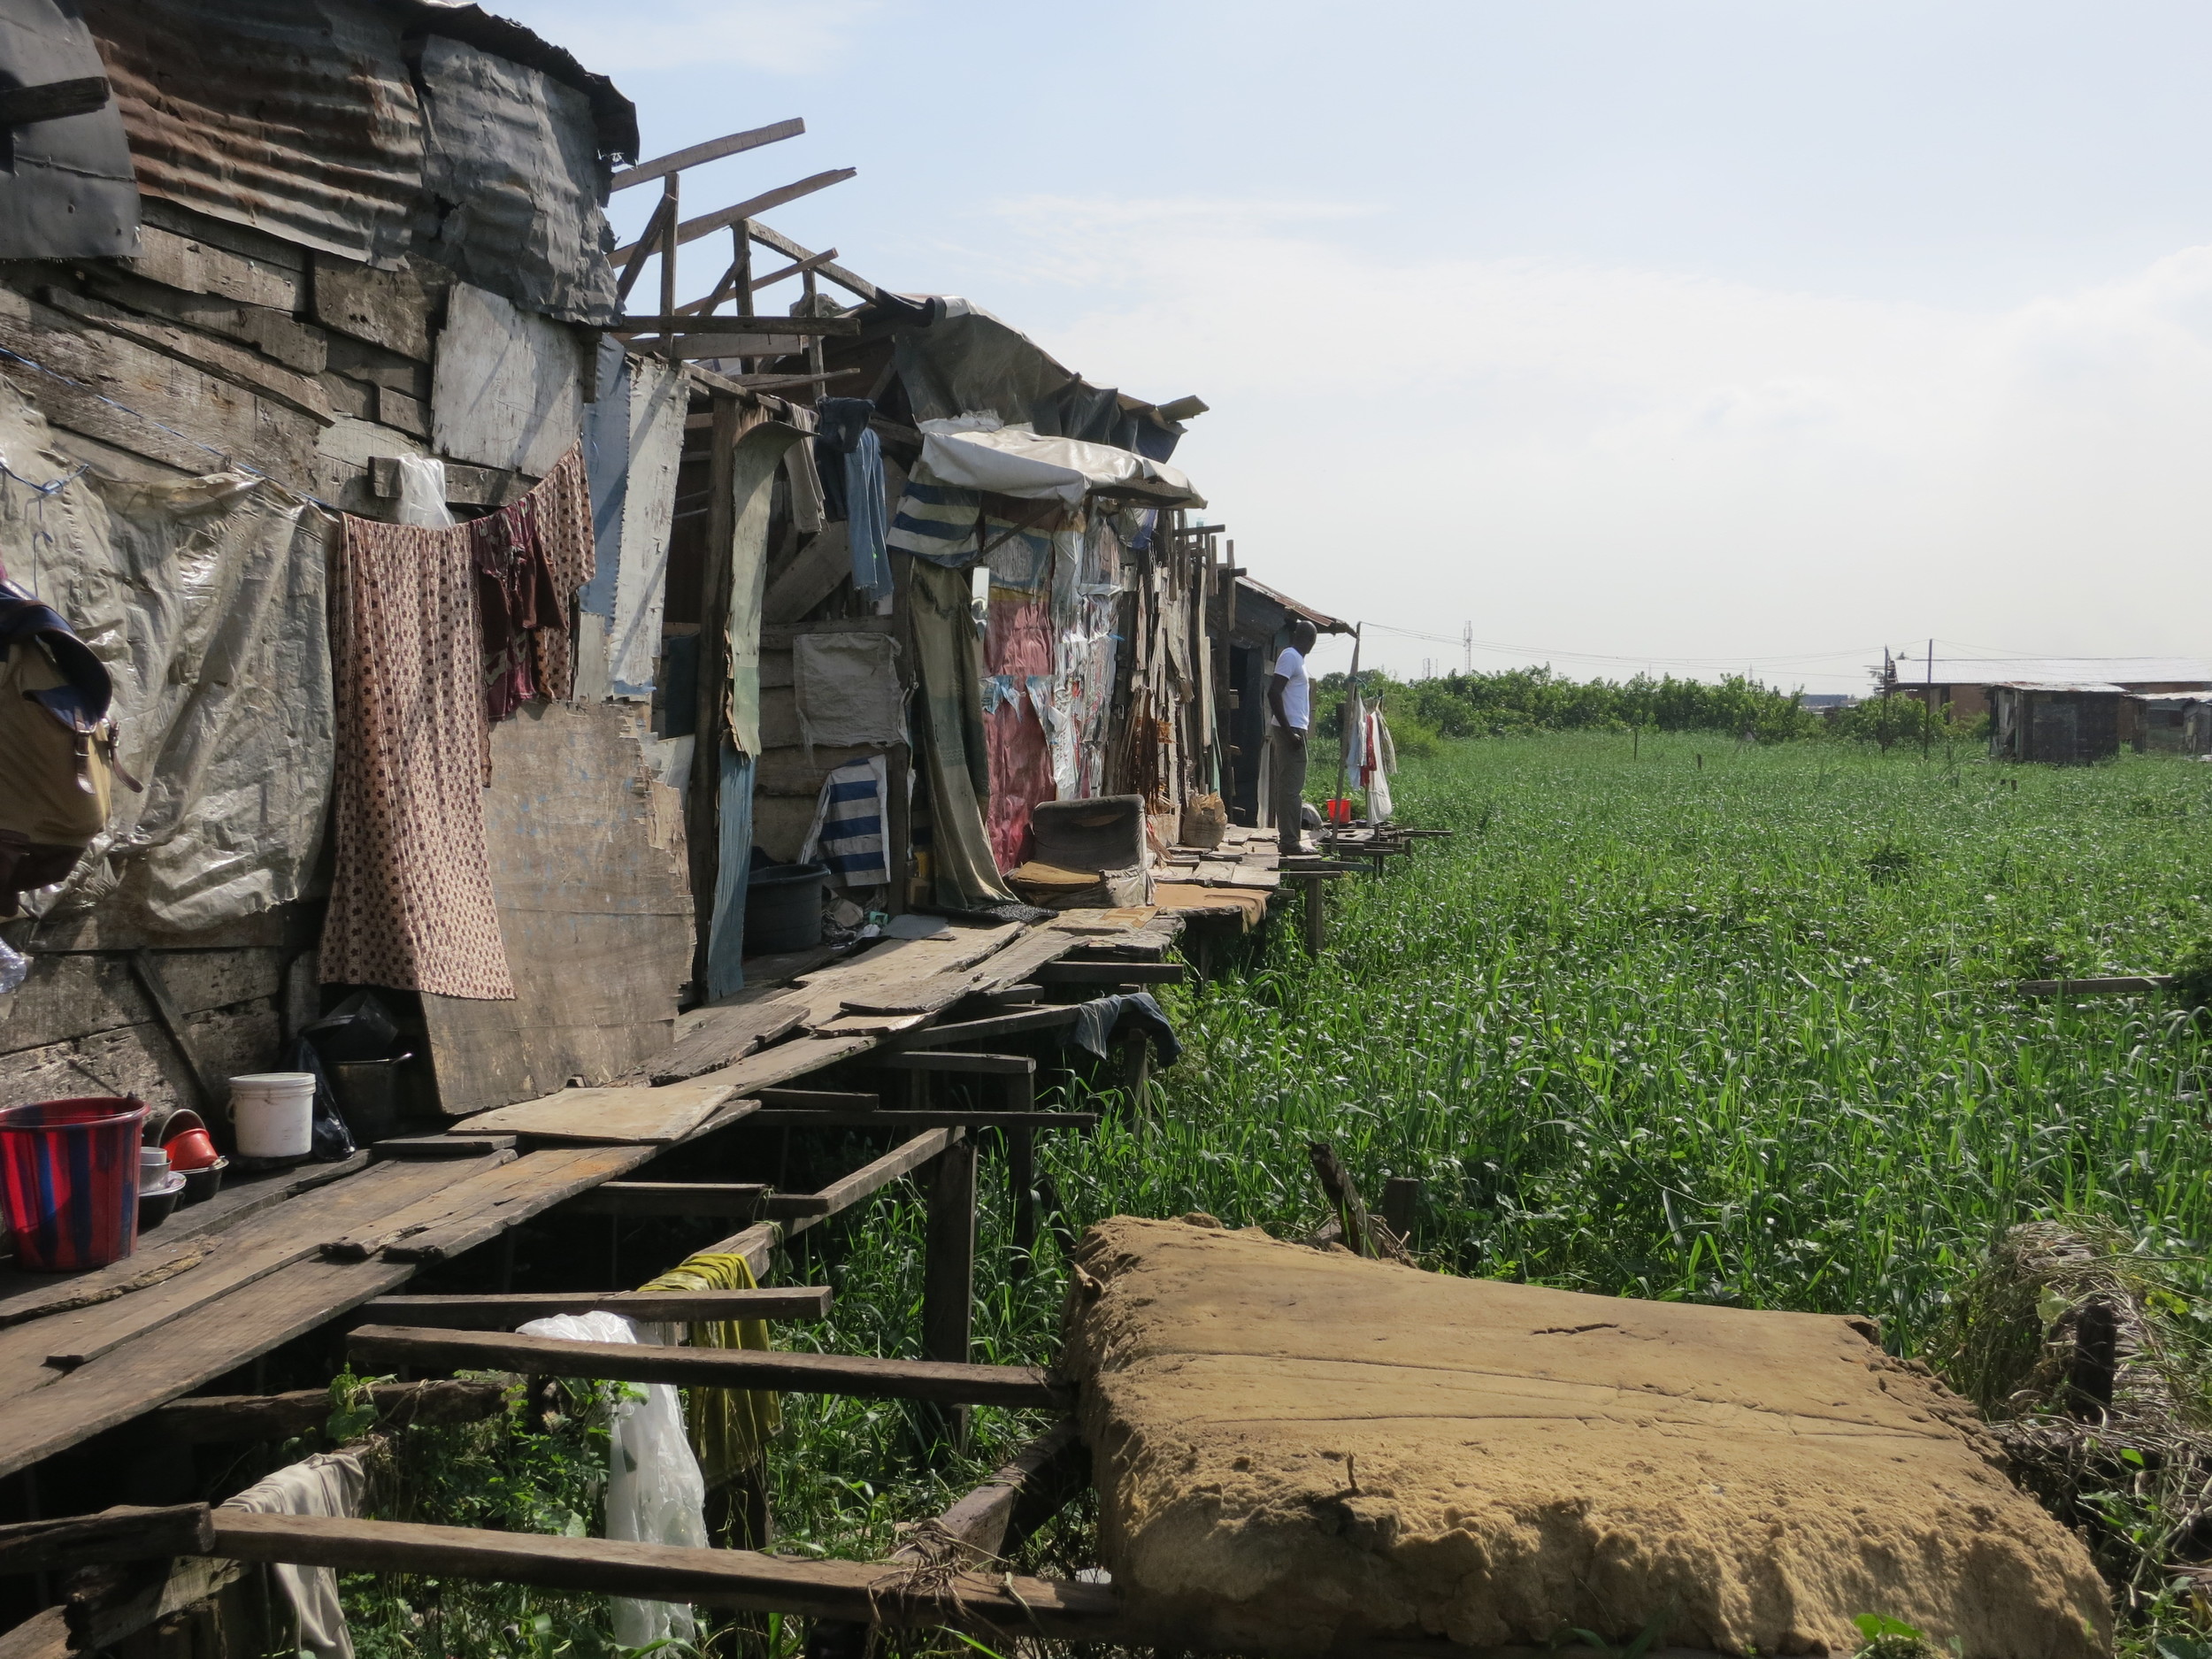 With rapid migration into cities and high birth rates, there is intense pressure on land in urban centers, resulting in innovative building solutions, like shacks on stilts above swamps and drainages.